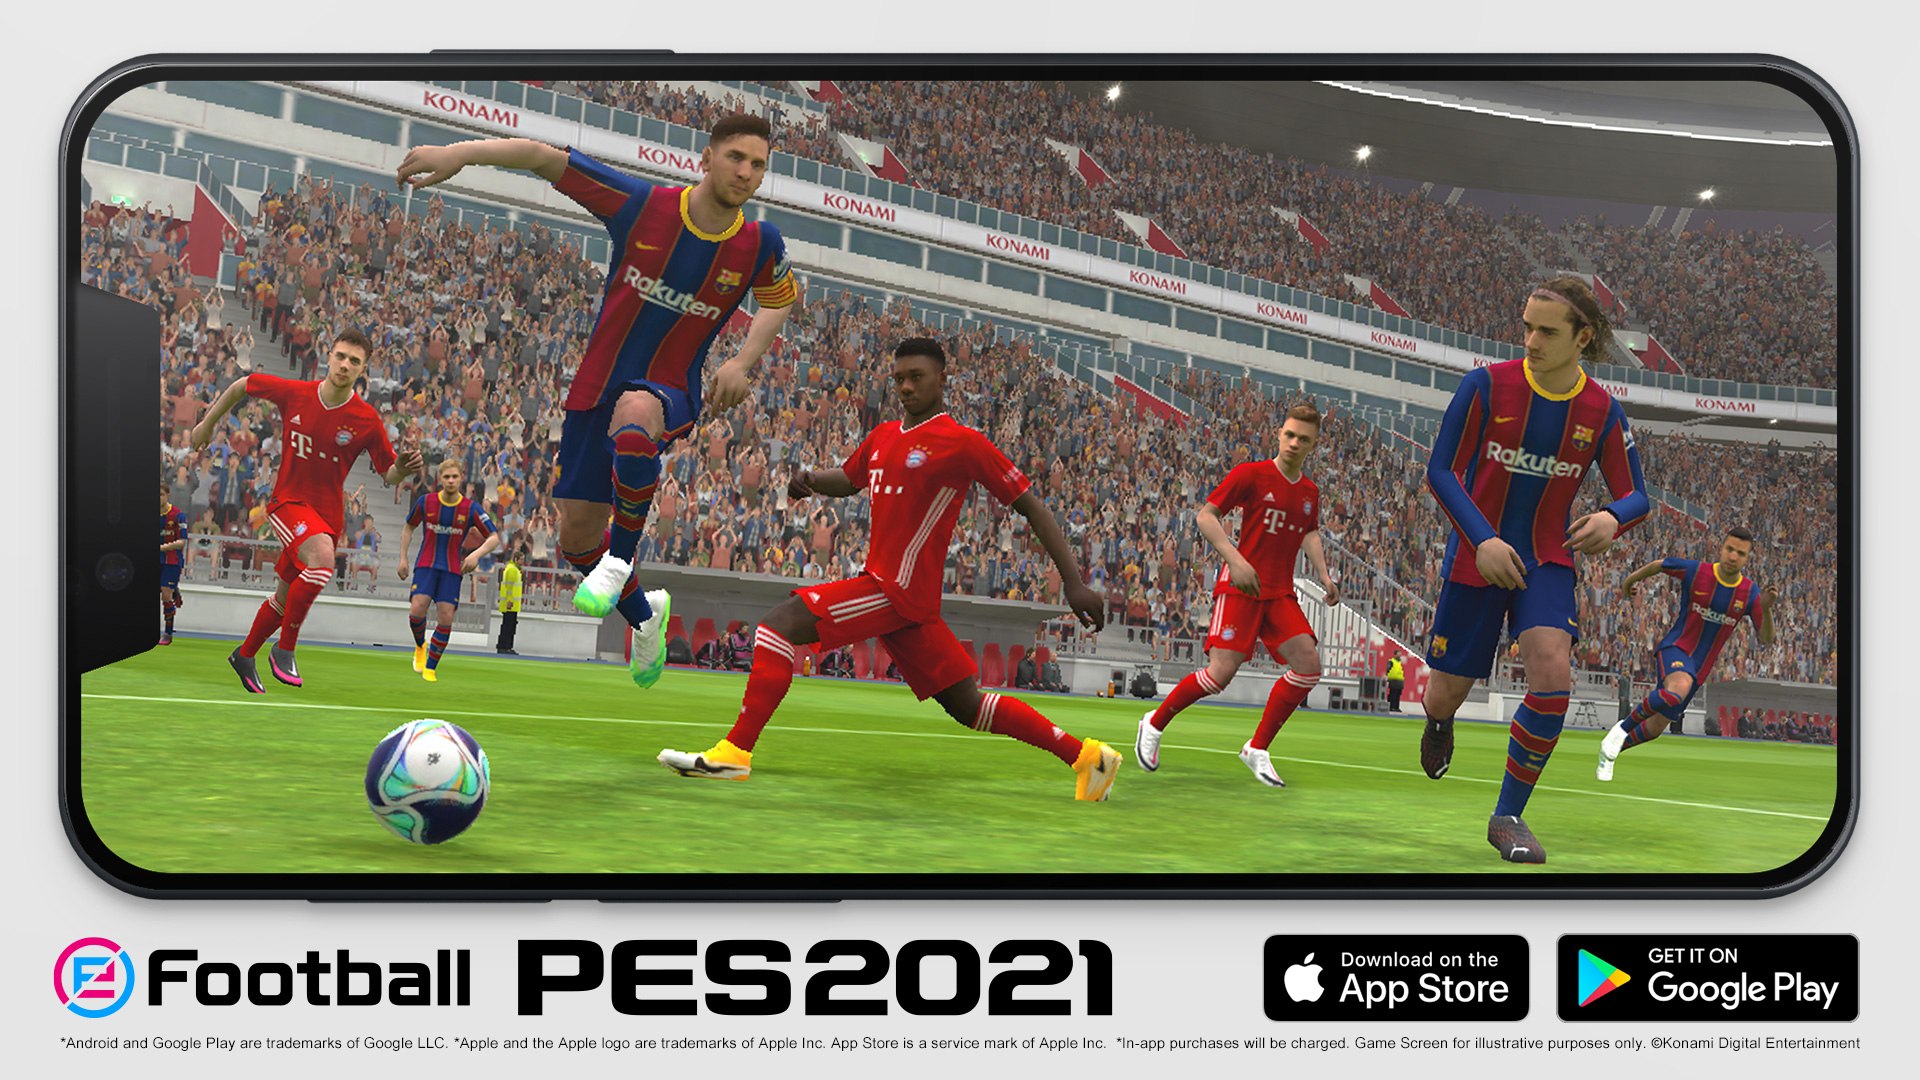 download free efootball 2022 update